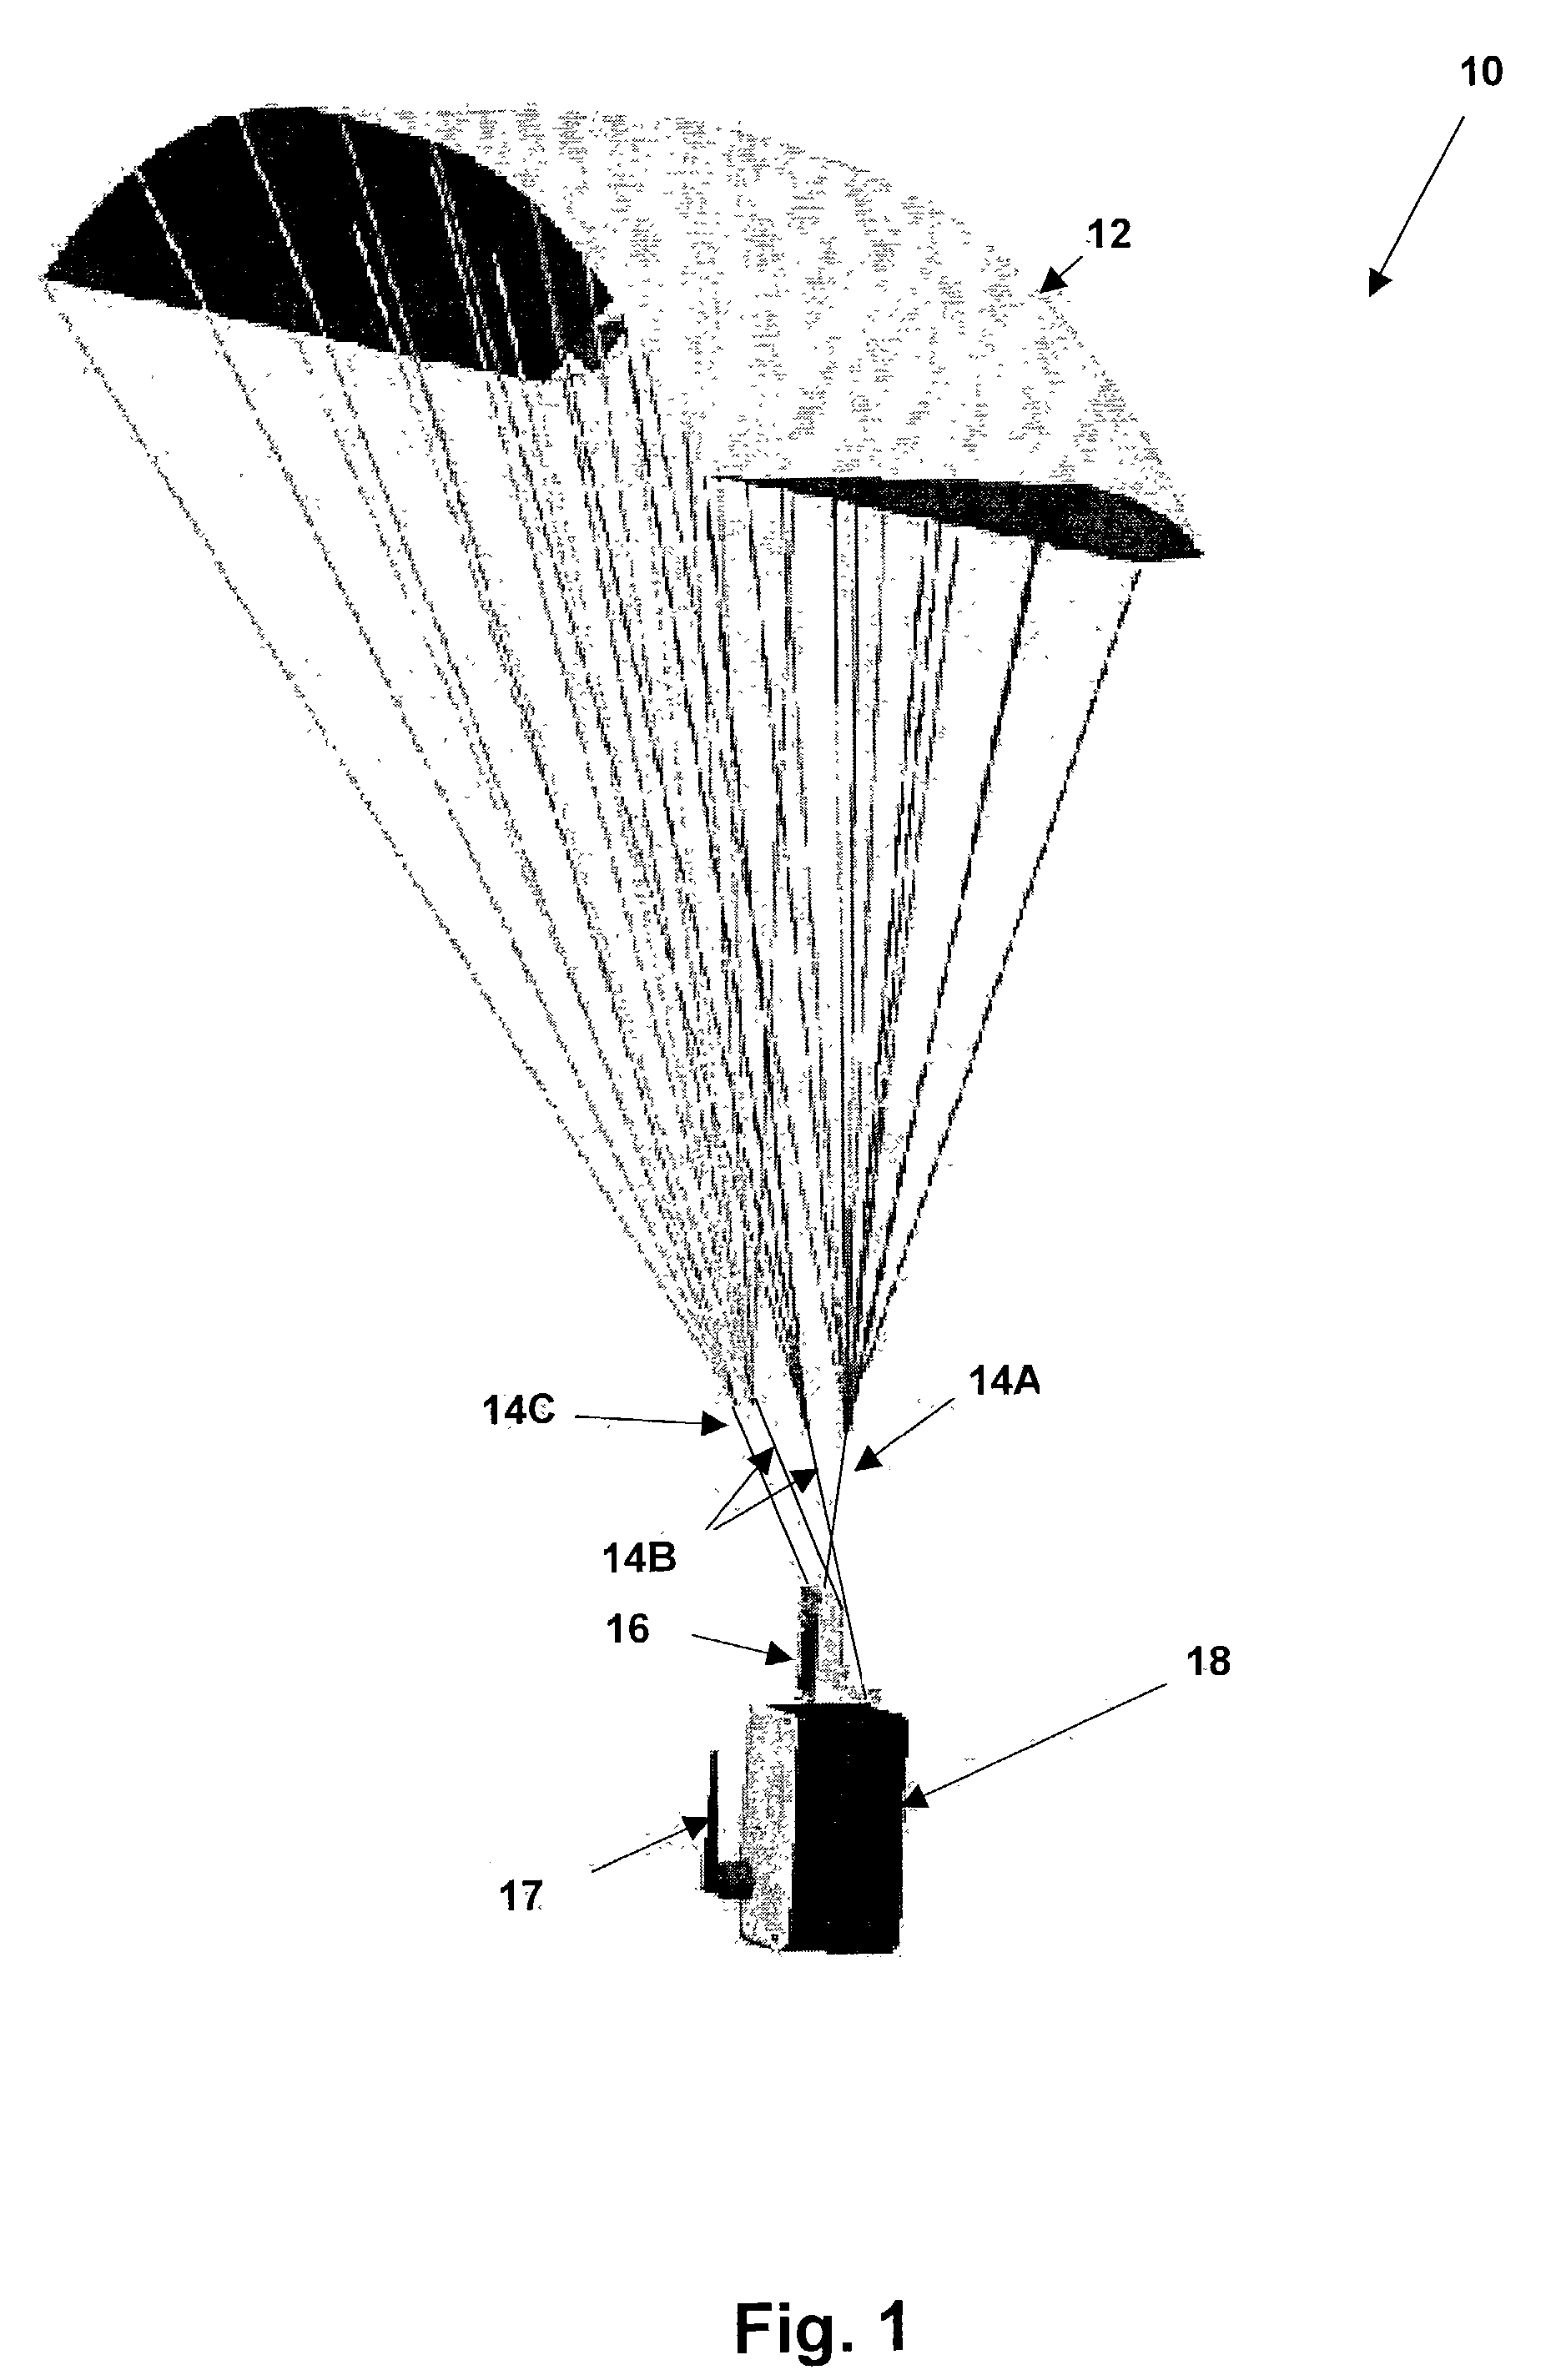 Guided parafoil system for delivering lightweight payloads